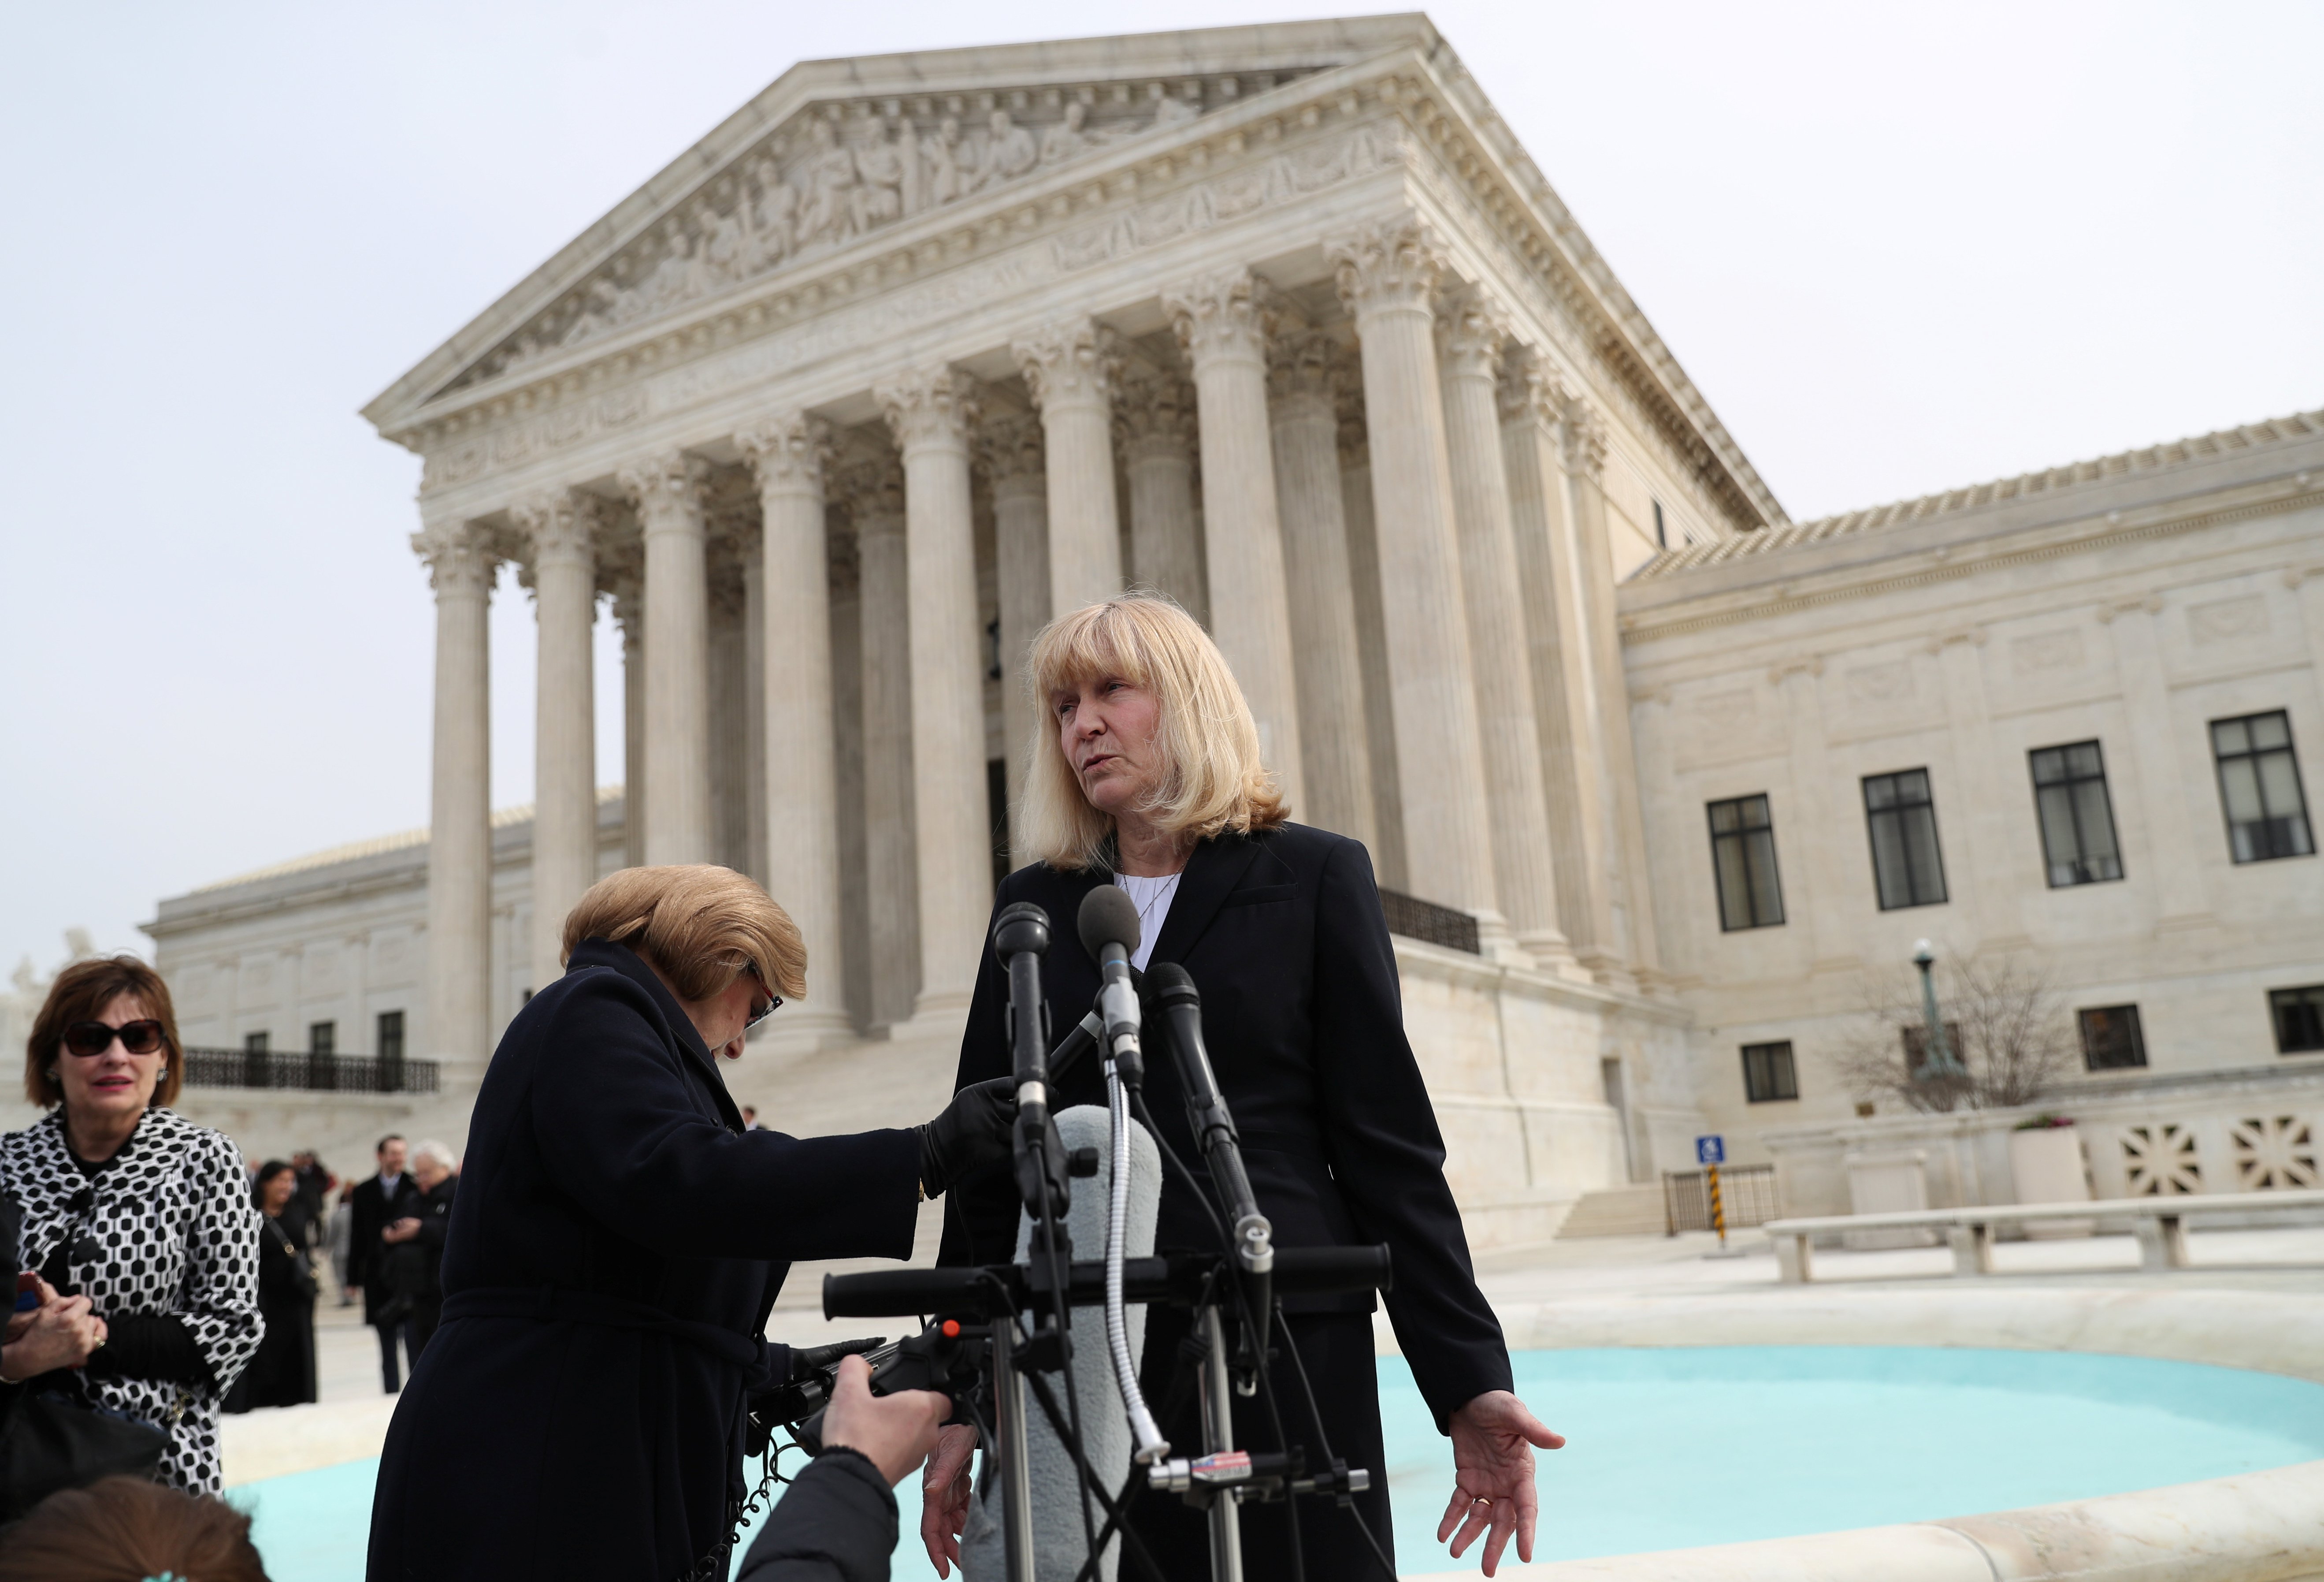 Sheri Lynn Johnson of the Cornell University Death Penalty Project, who represents Curtis Flowers, speaks to the news media outside of the Supreme Court on March 20, 2019. REUTERS/Leah Millis